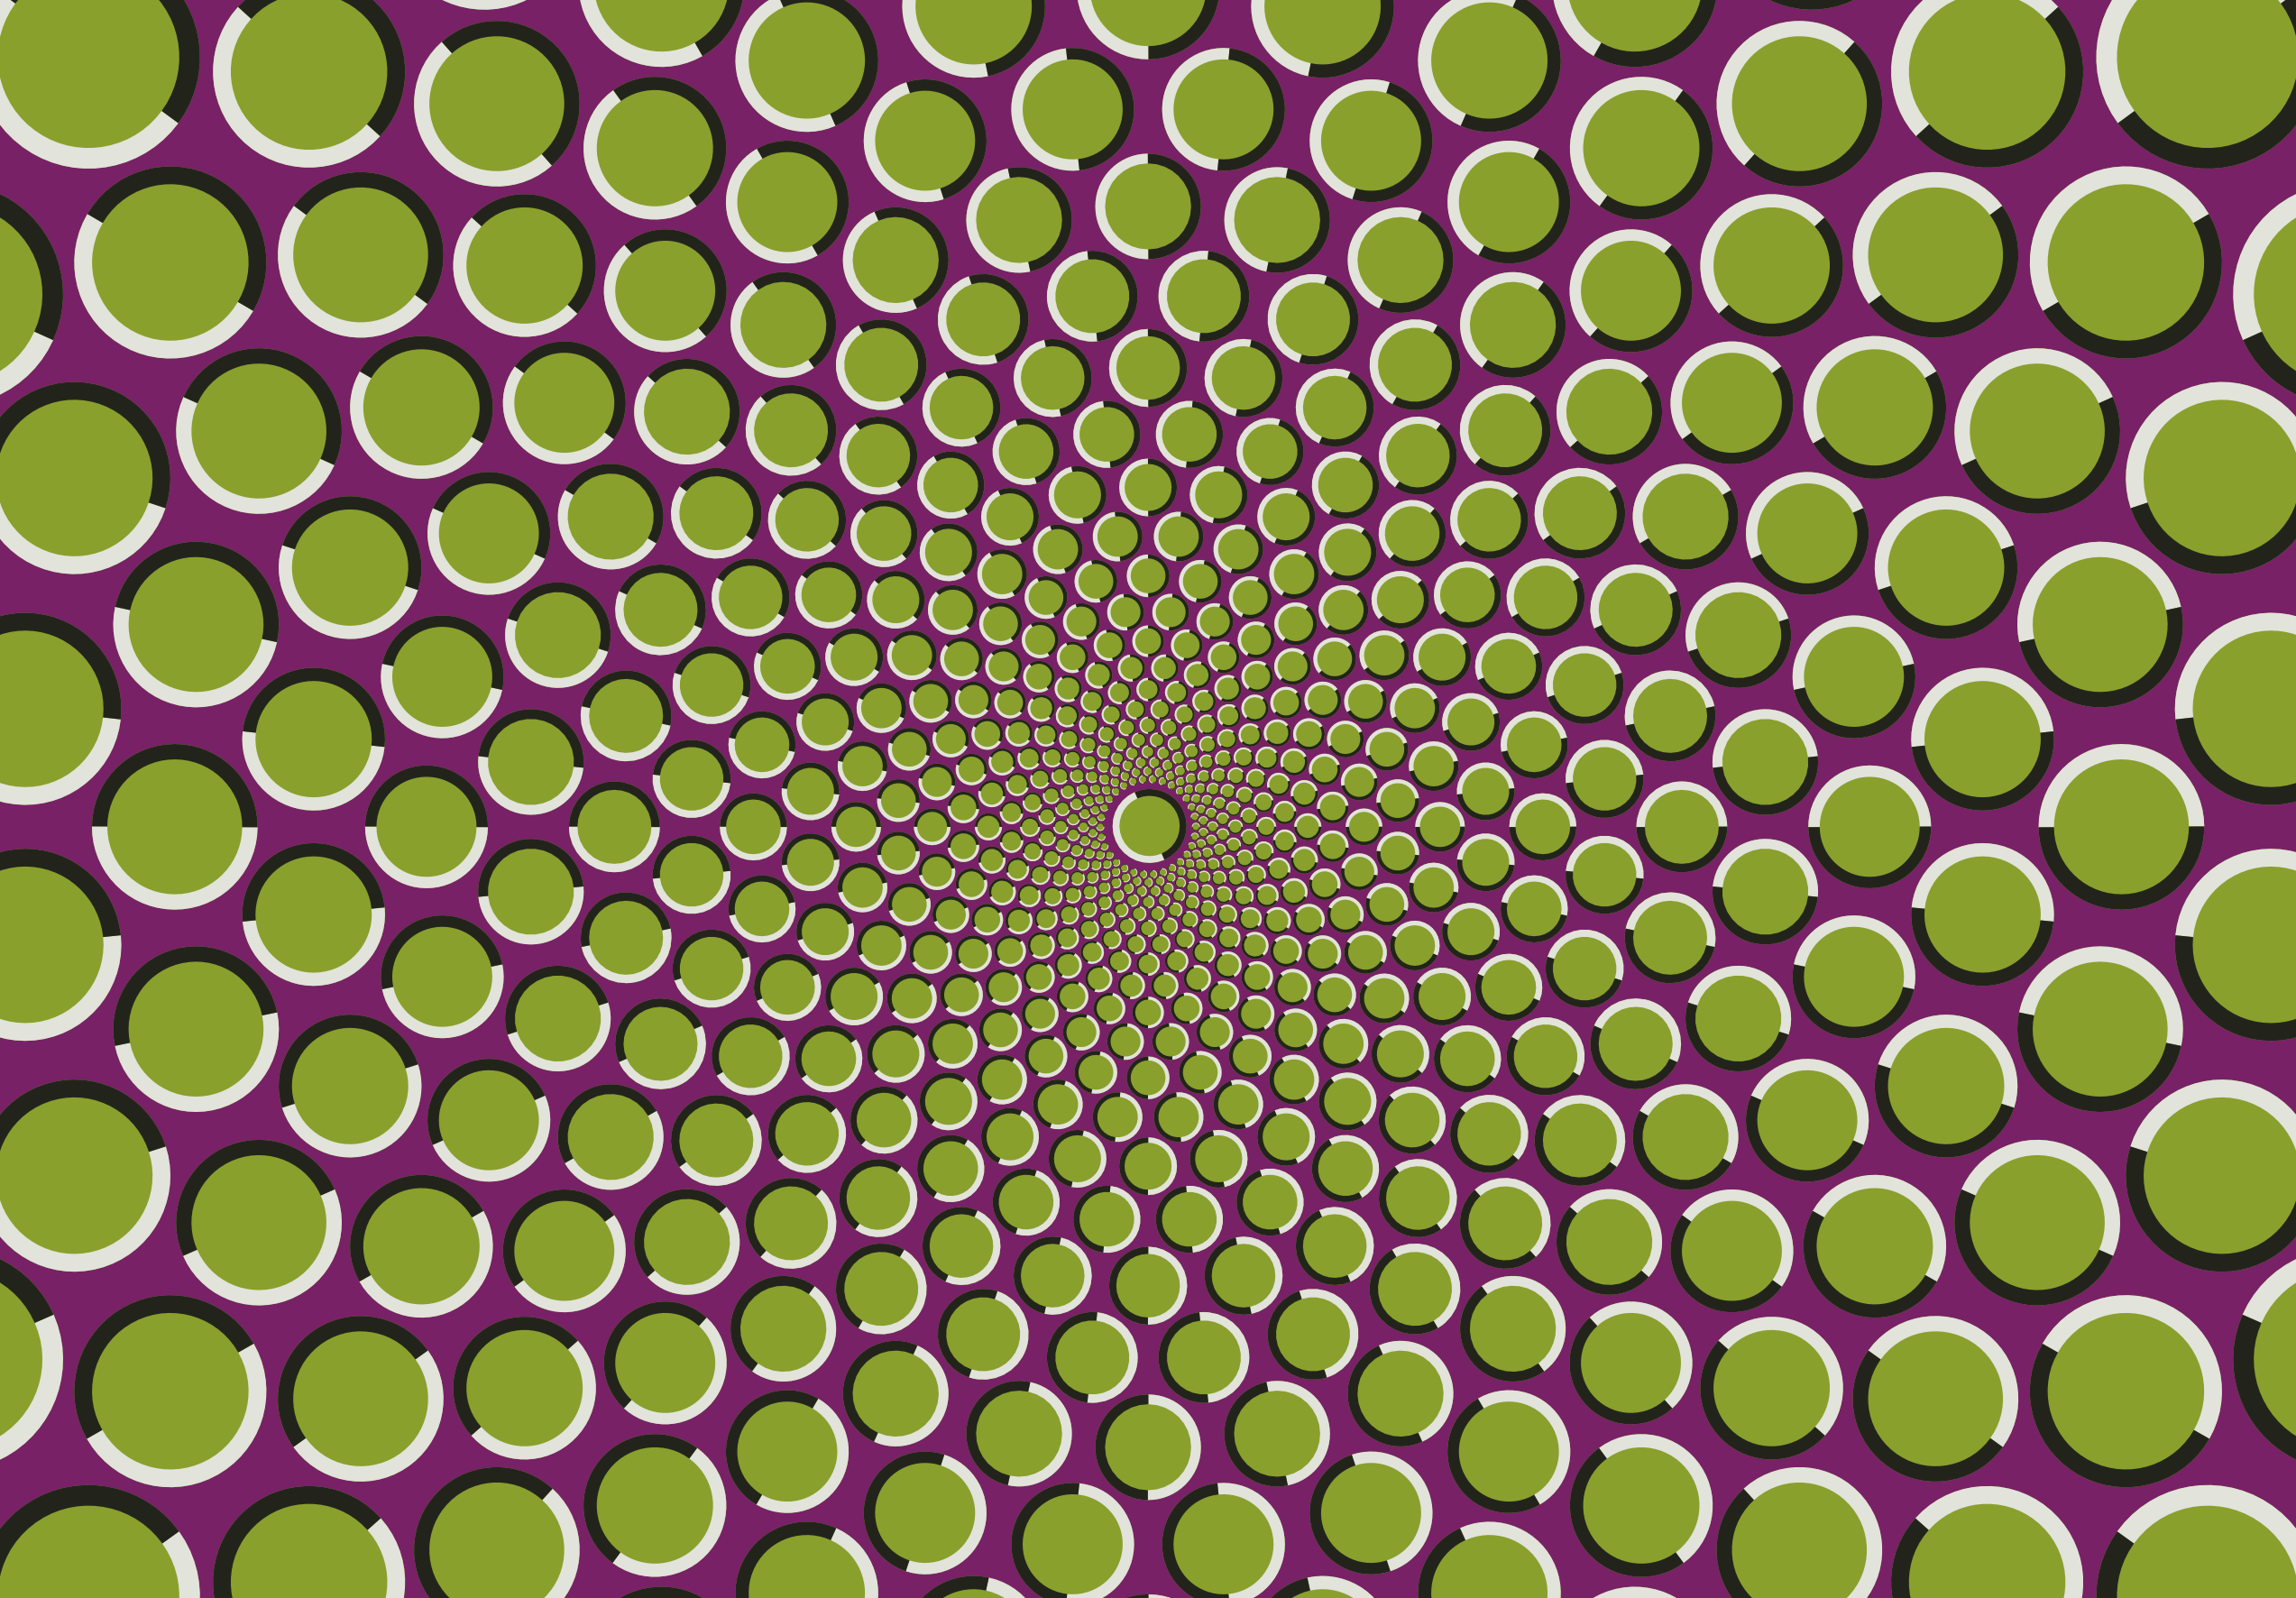 An optical illusion in which a static image appears to be moving